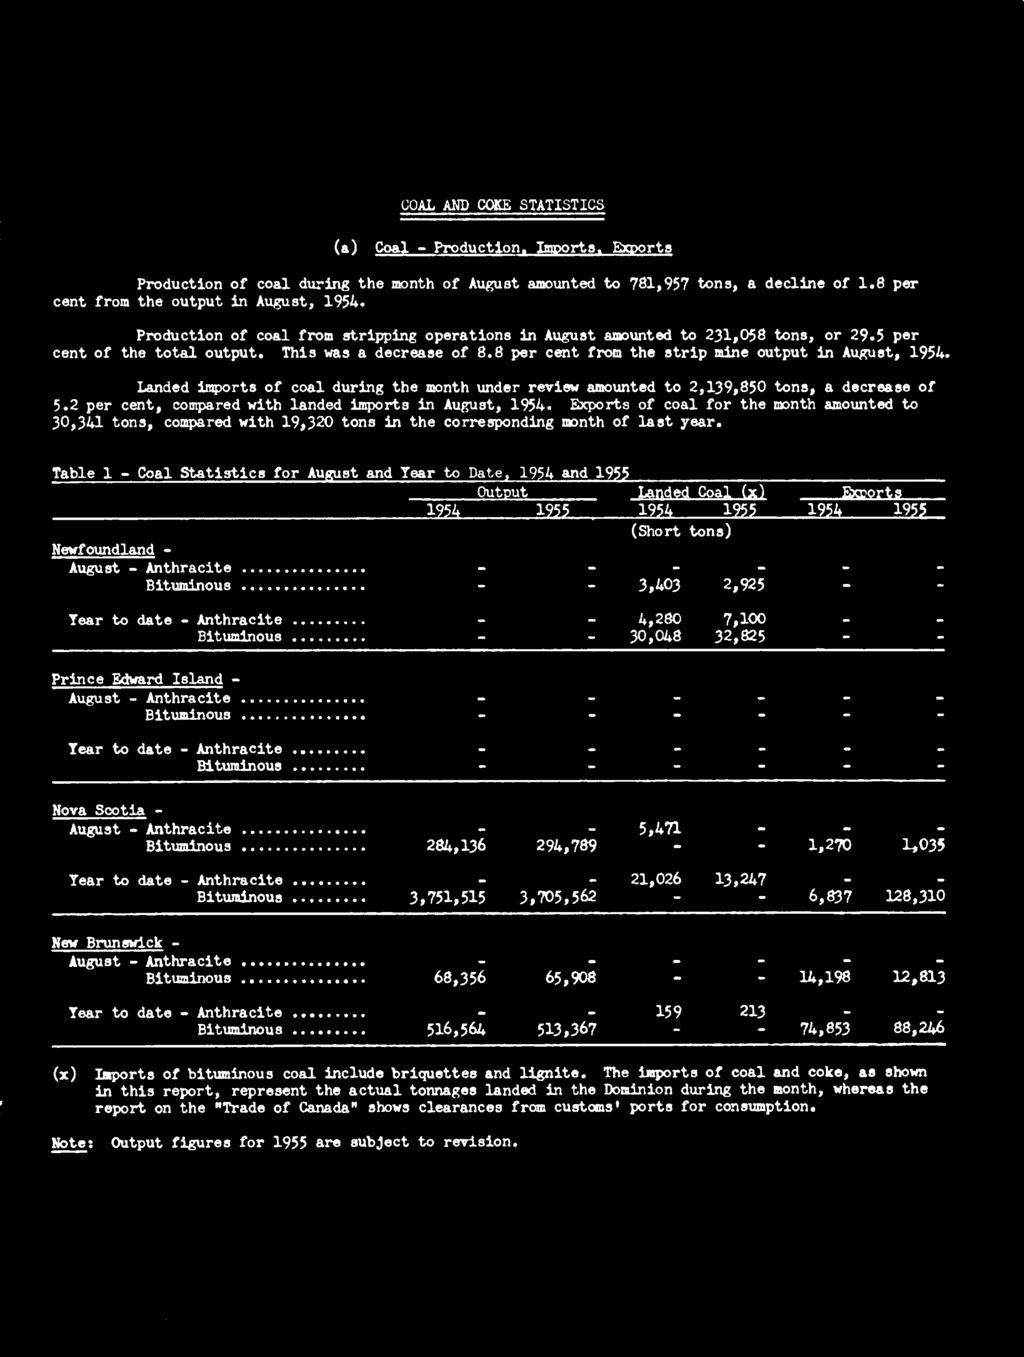 Table 1 Coal Statistics for August and Year to Date s 1954 and 19 0utut Landed Coal (x) Exrorts 1954 1955 1954 1955 1954 1955 (Short tone) Newfoundland August Anthracite Bituminous 3,403 2,925 Year